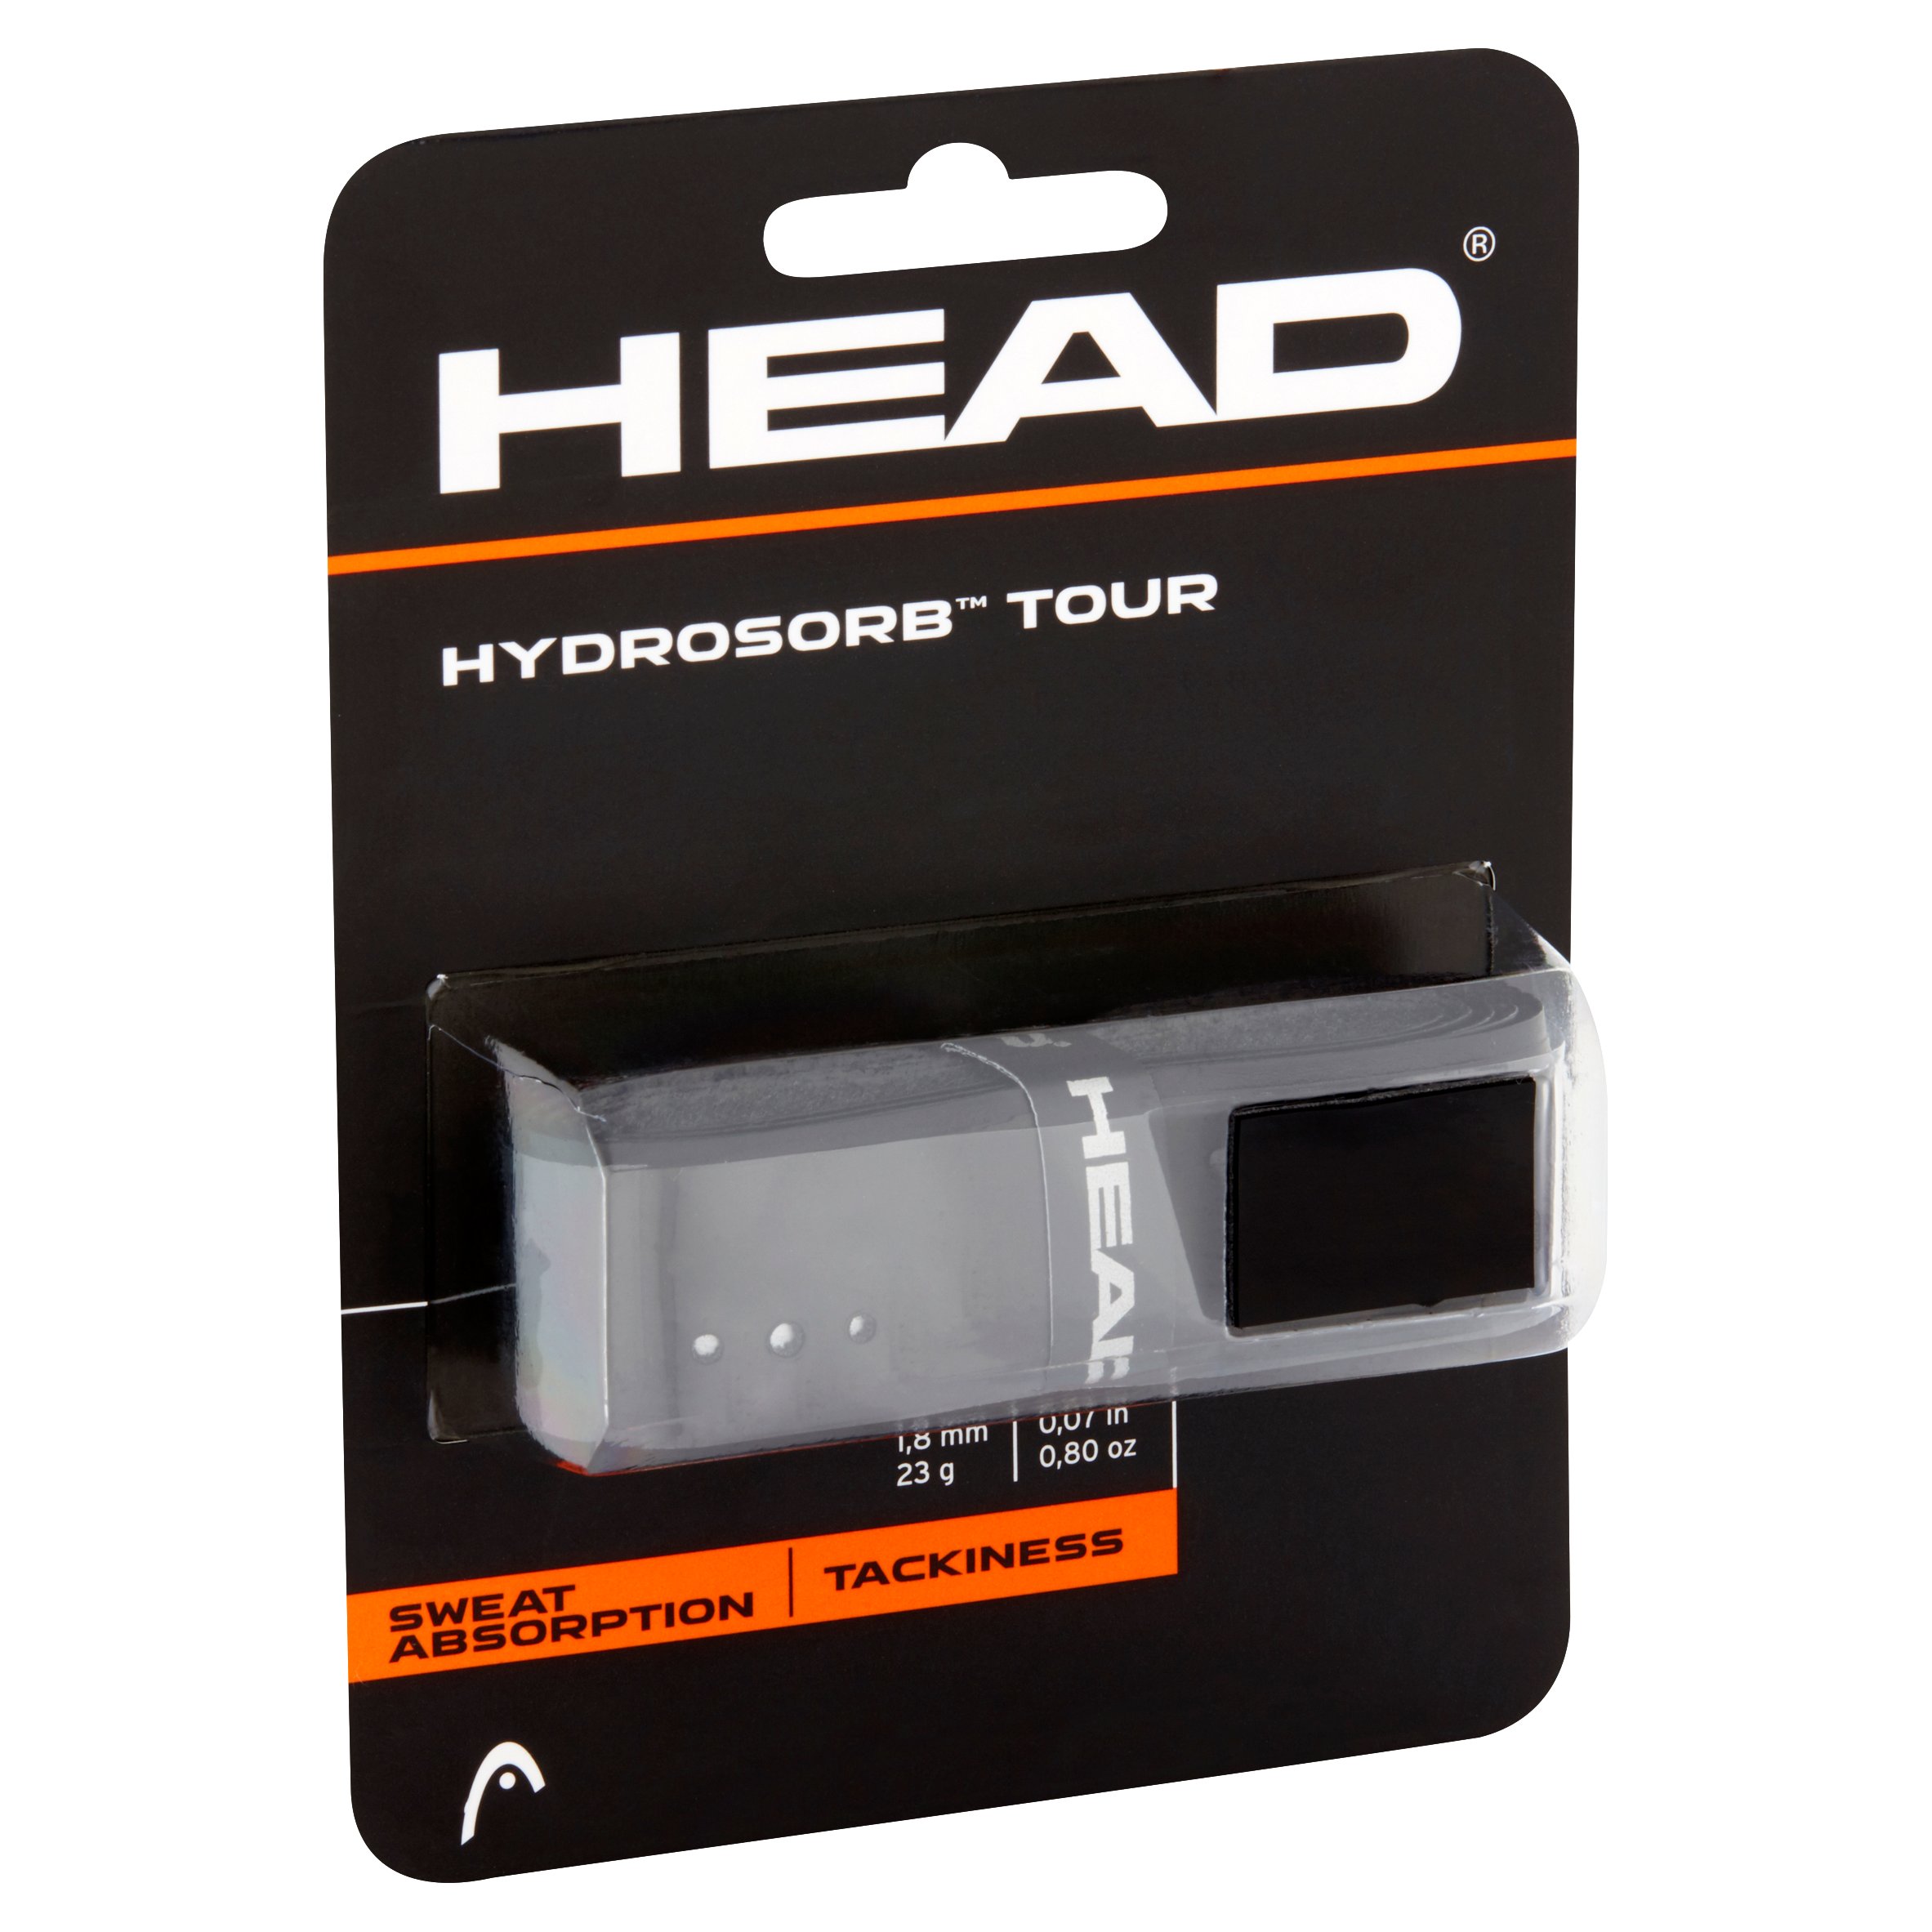 HEAD HydroSorb Tour Replacement Grip, Black - image 2 of 8